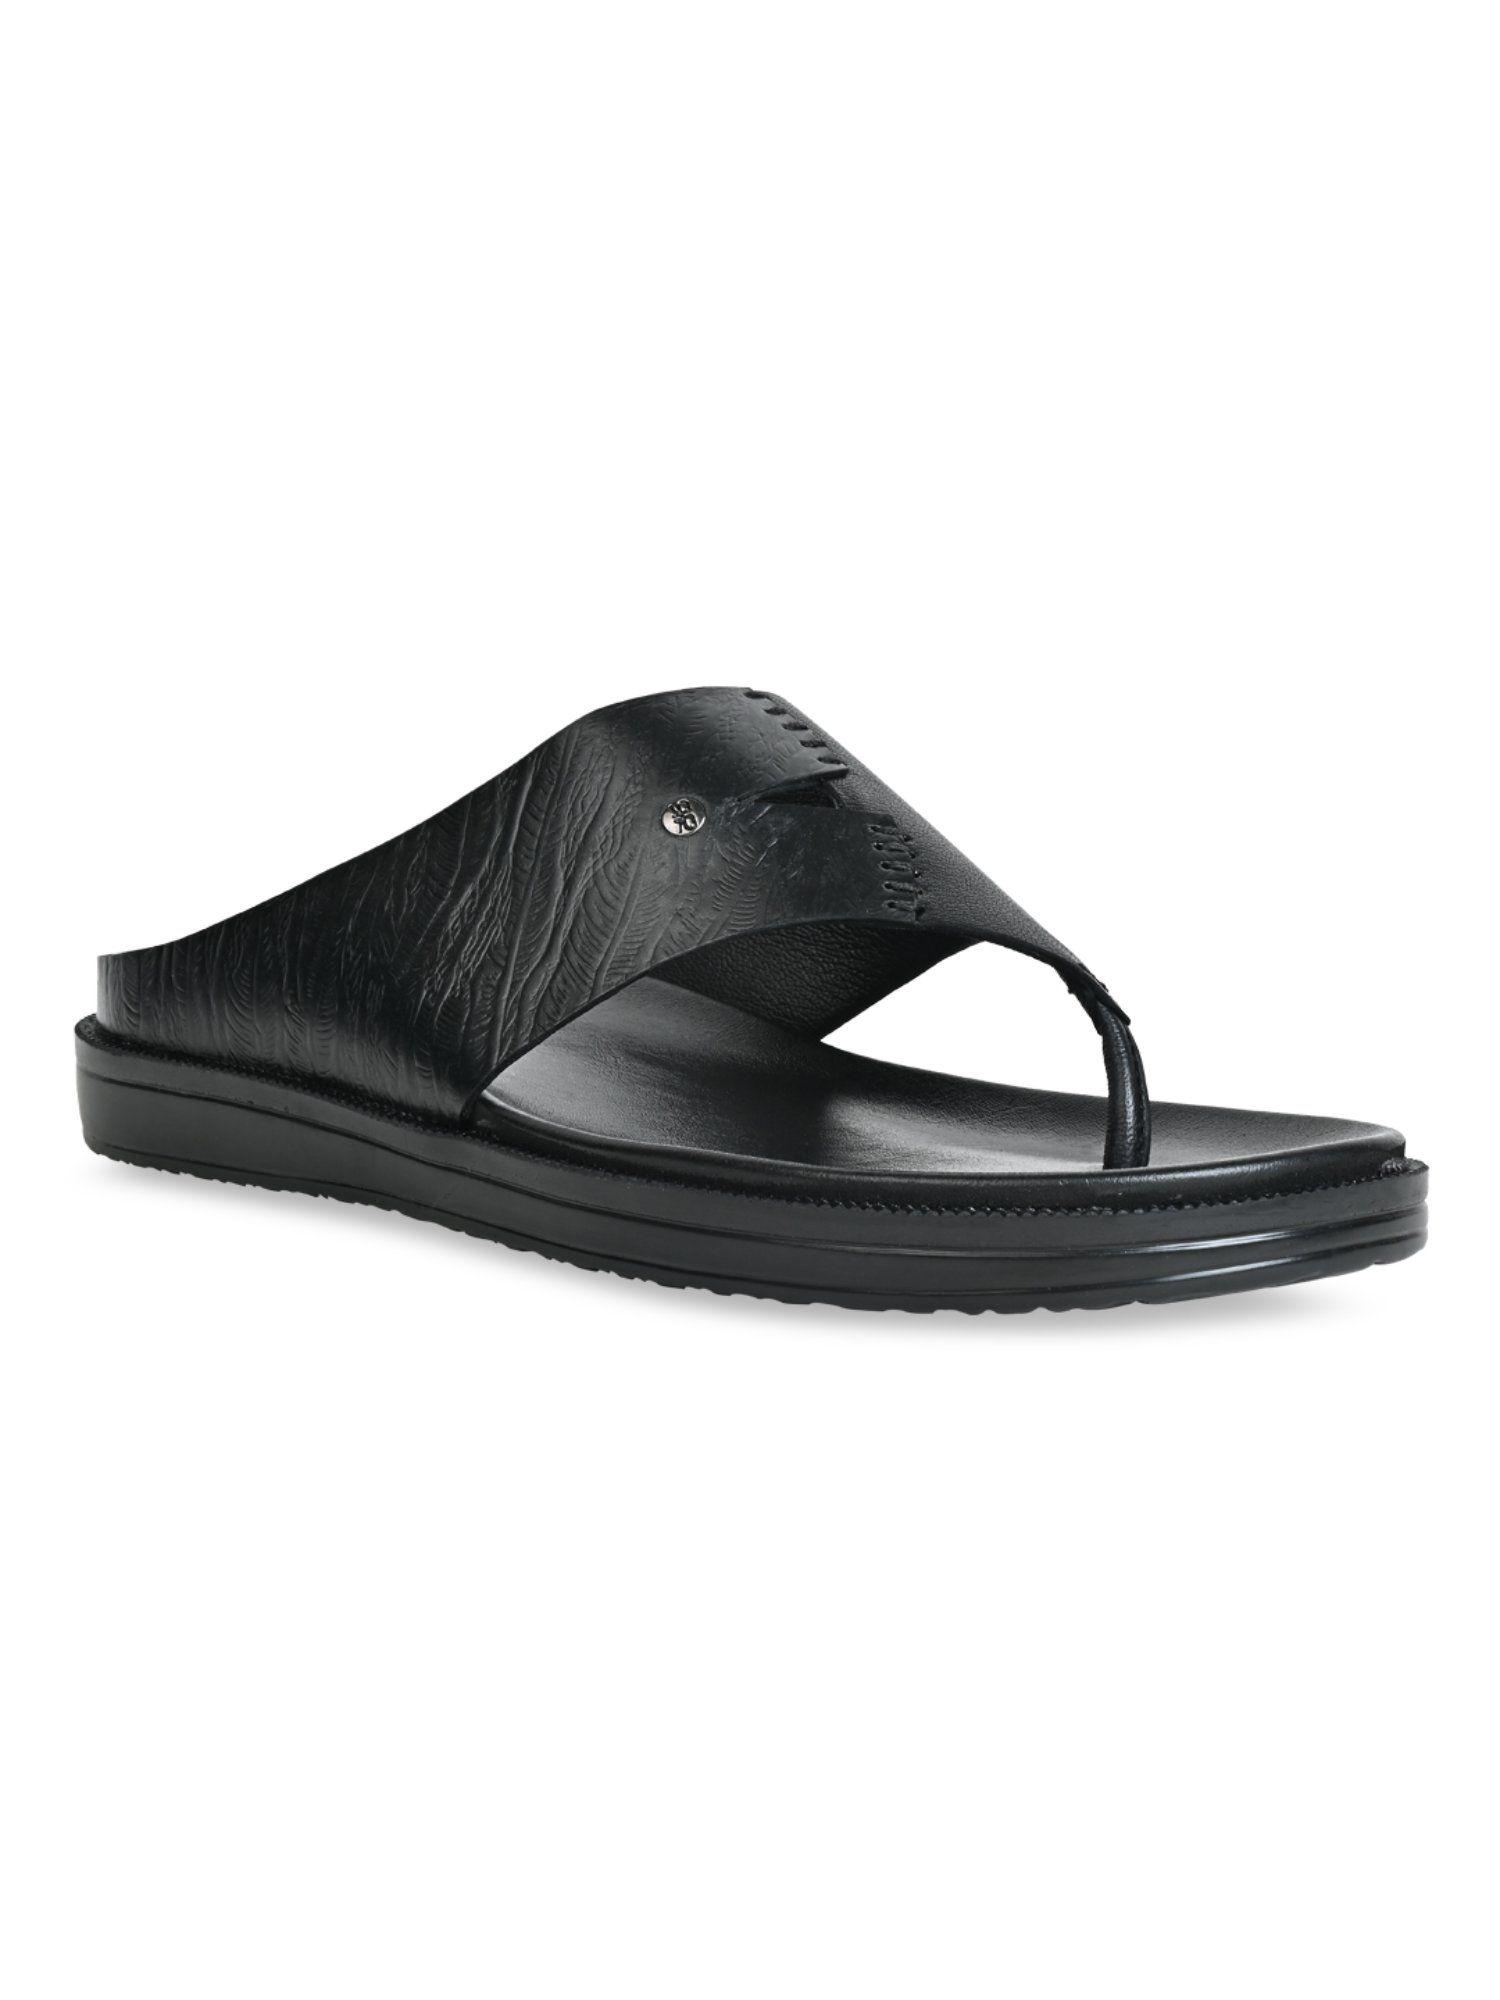 black-men-casual-textured-leather-sandals